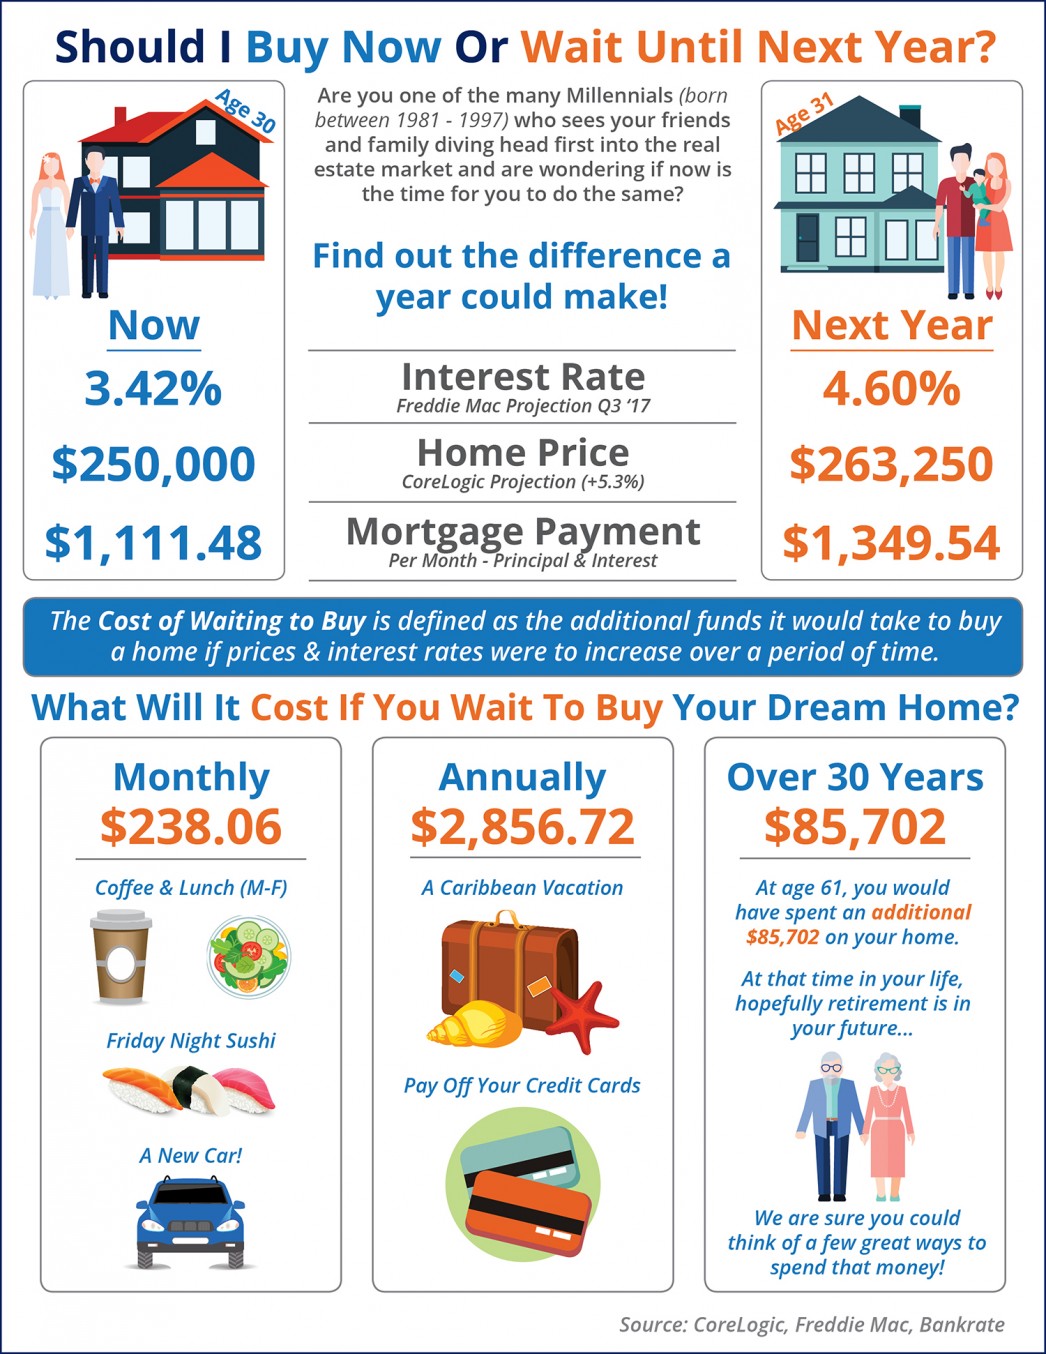 Should I Wait Until Next Year? Or Buy Now? [INFOGRAPHIC] | MyKCM